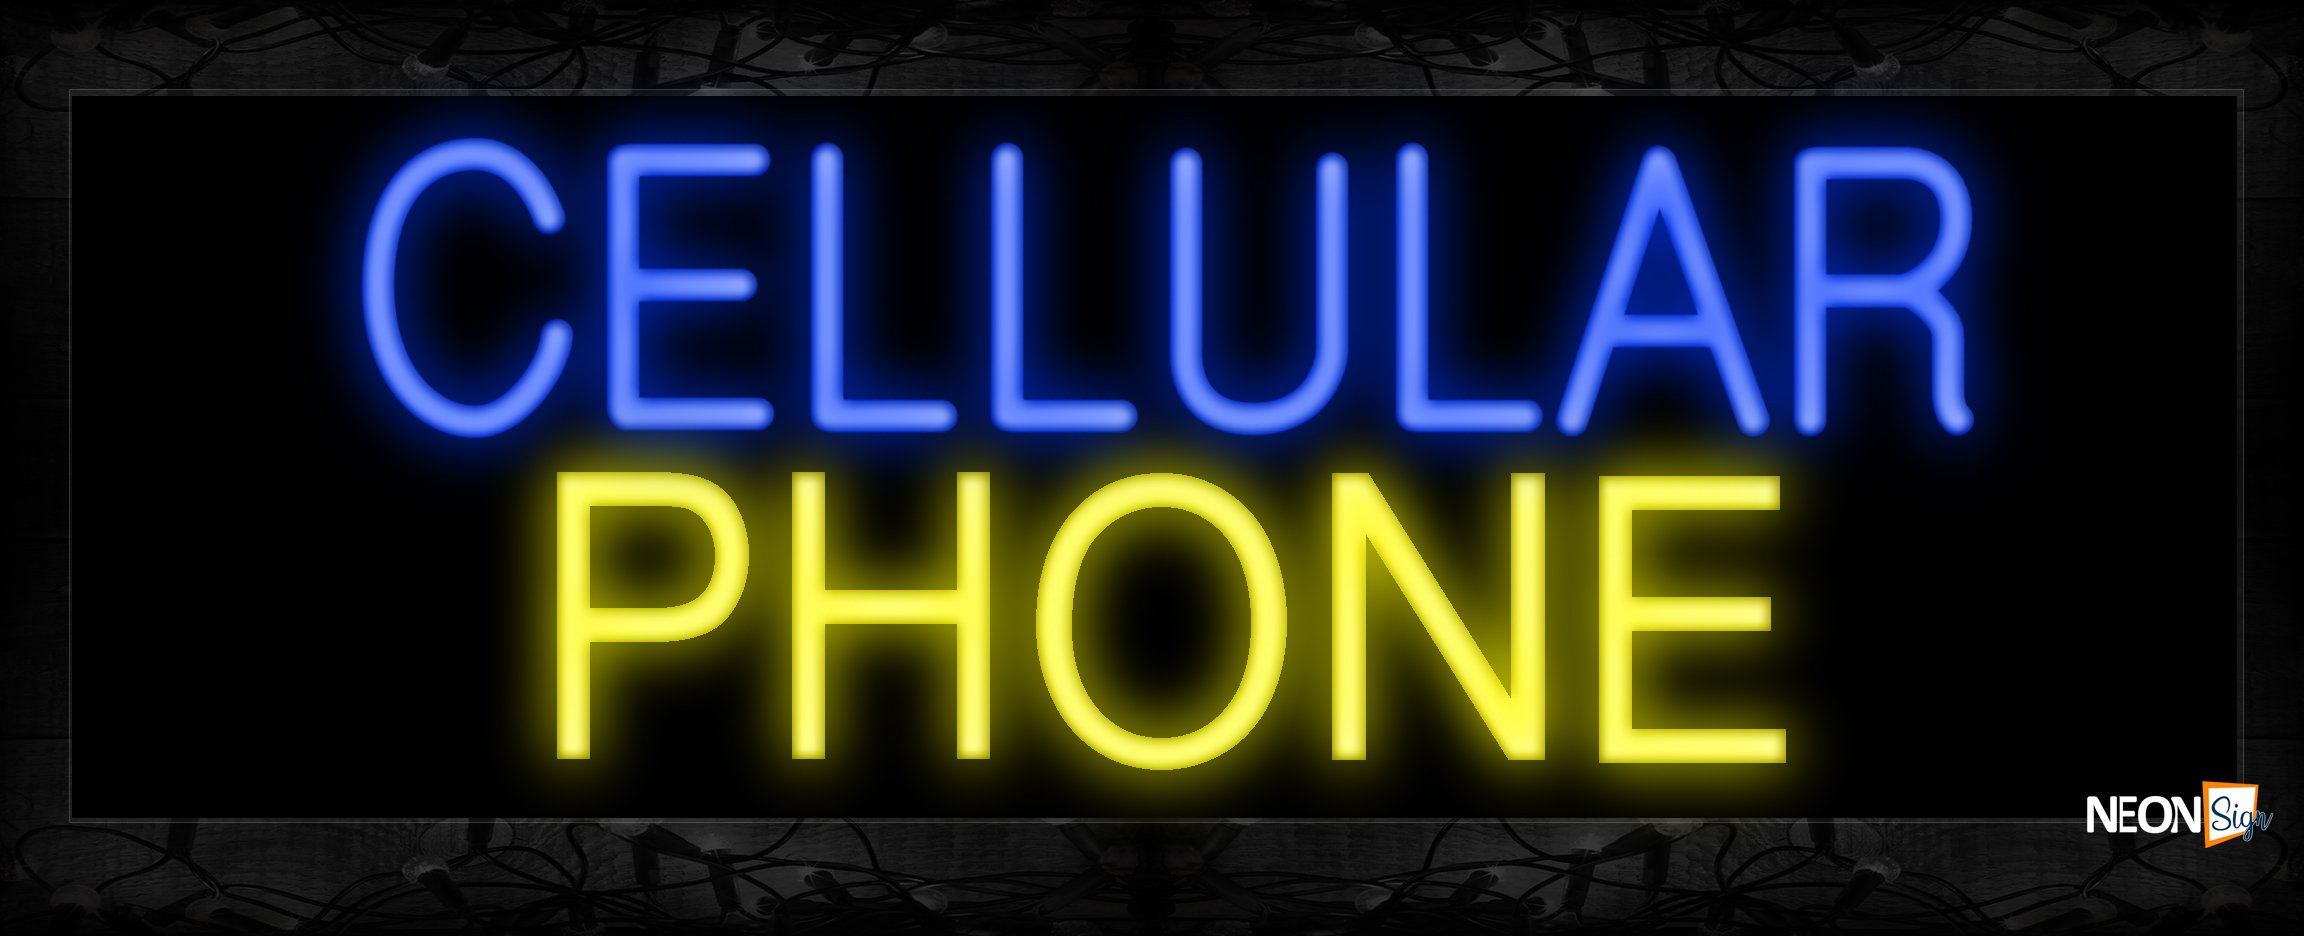 Image of 10034 Cellular Phone Neon Sign 13x32 Black Backing